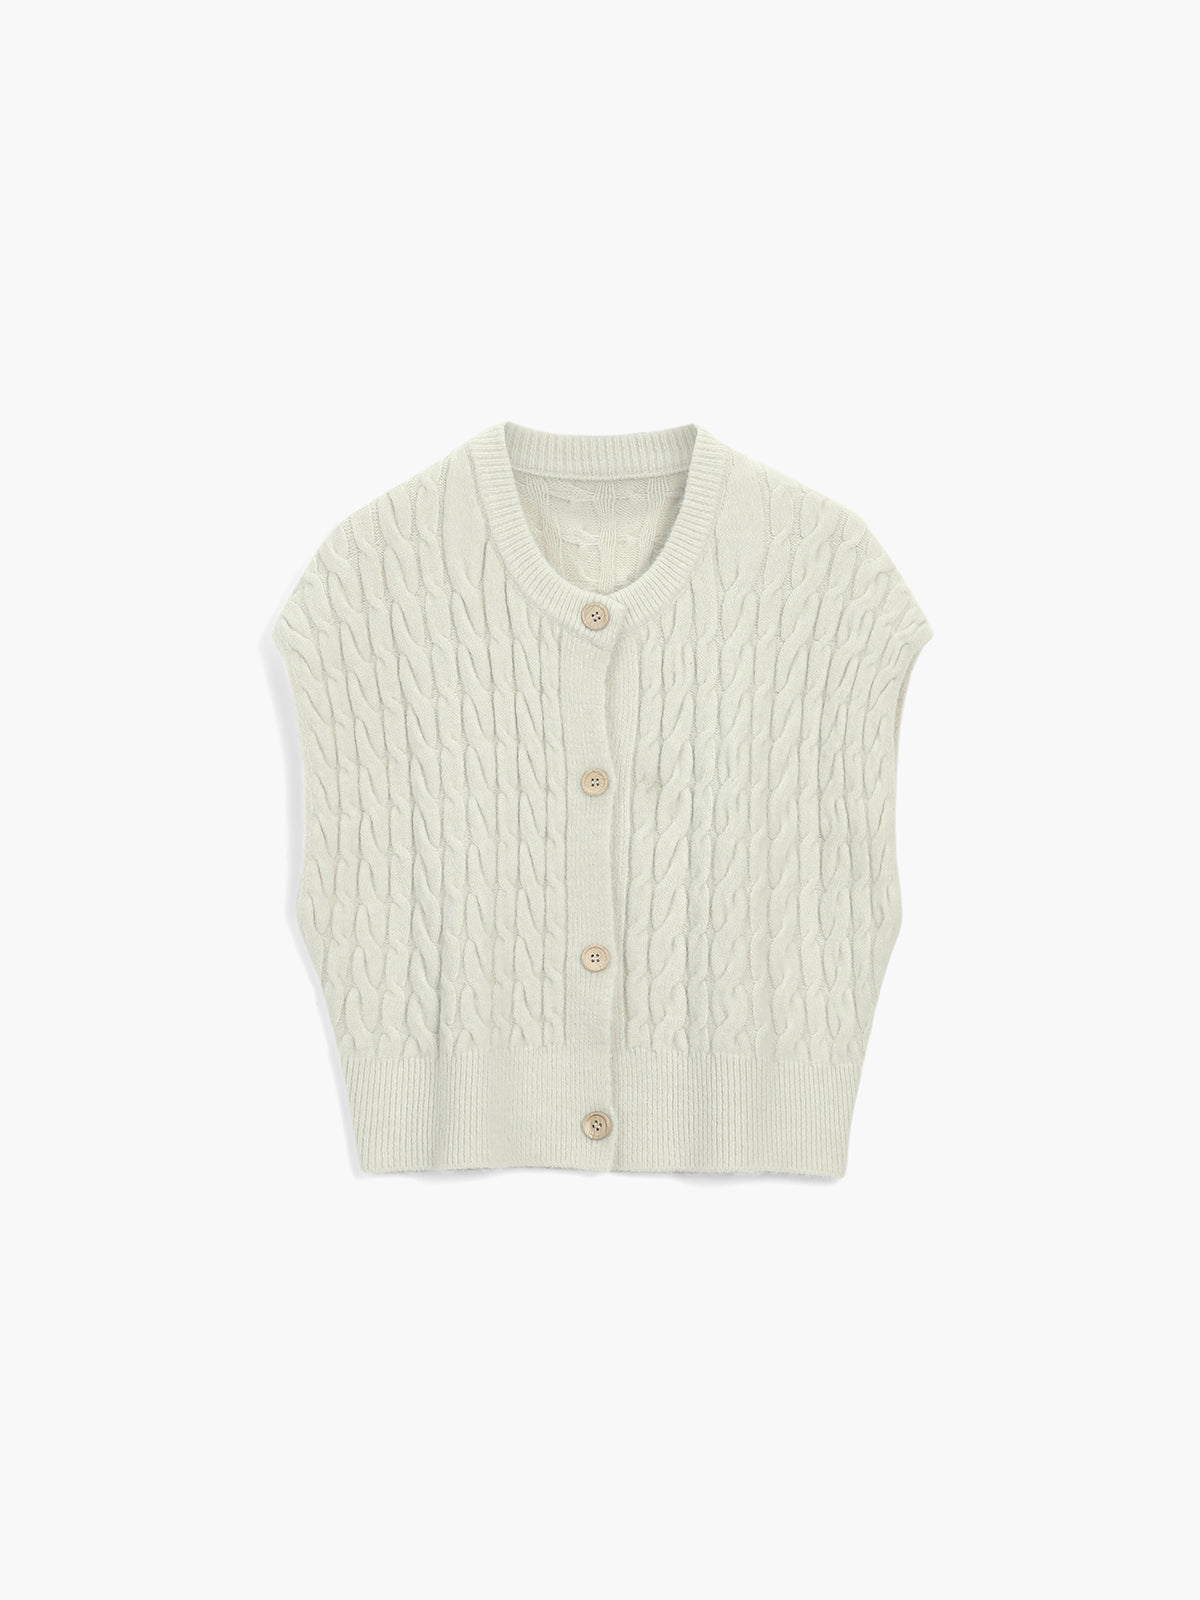 Utility Cable Knit Sweater Vest